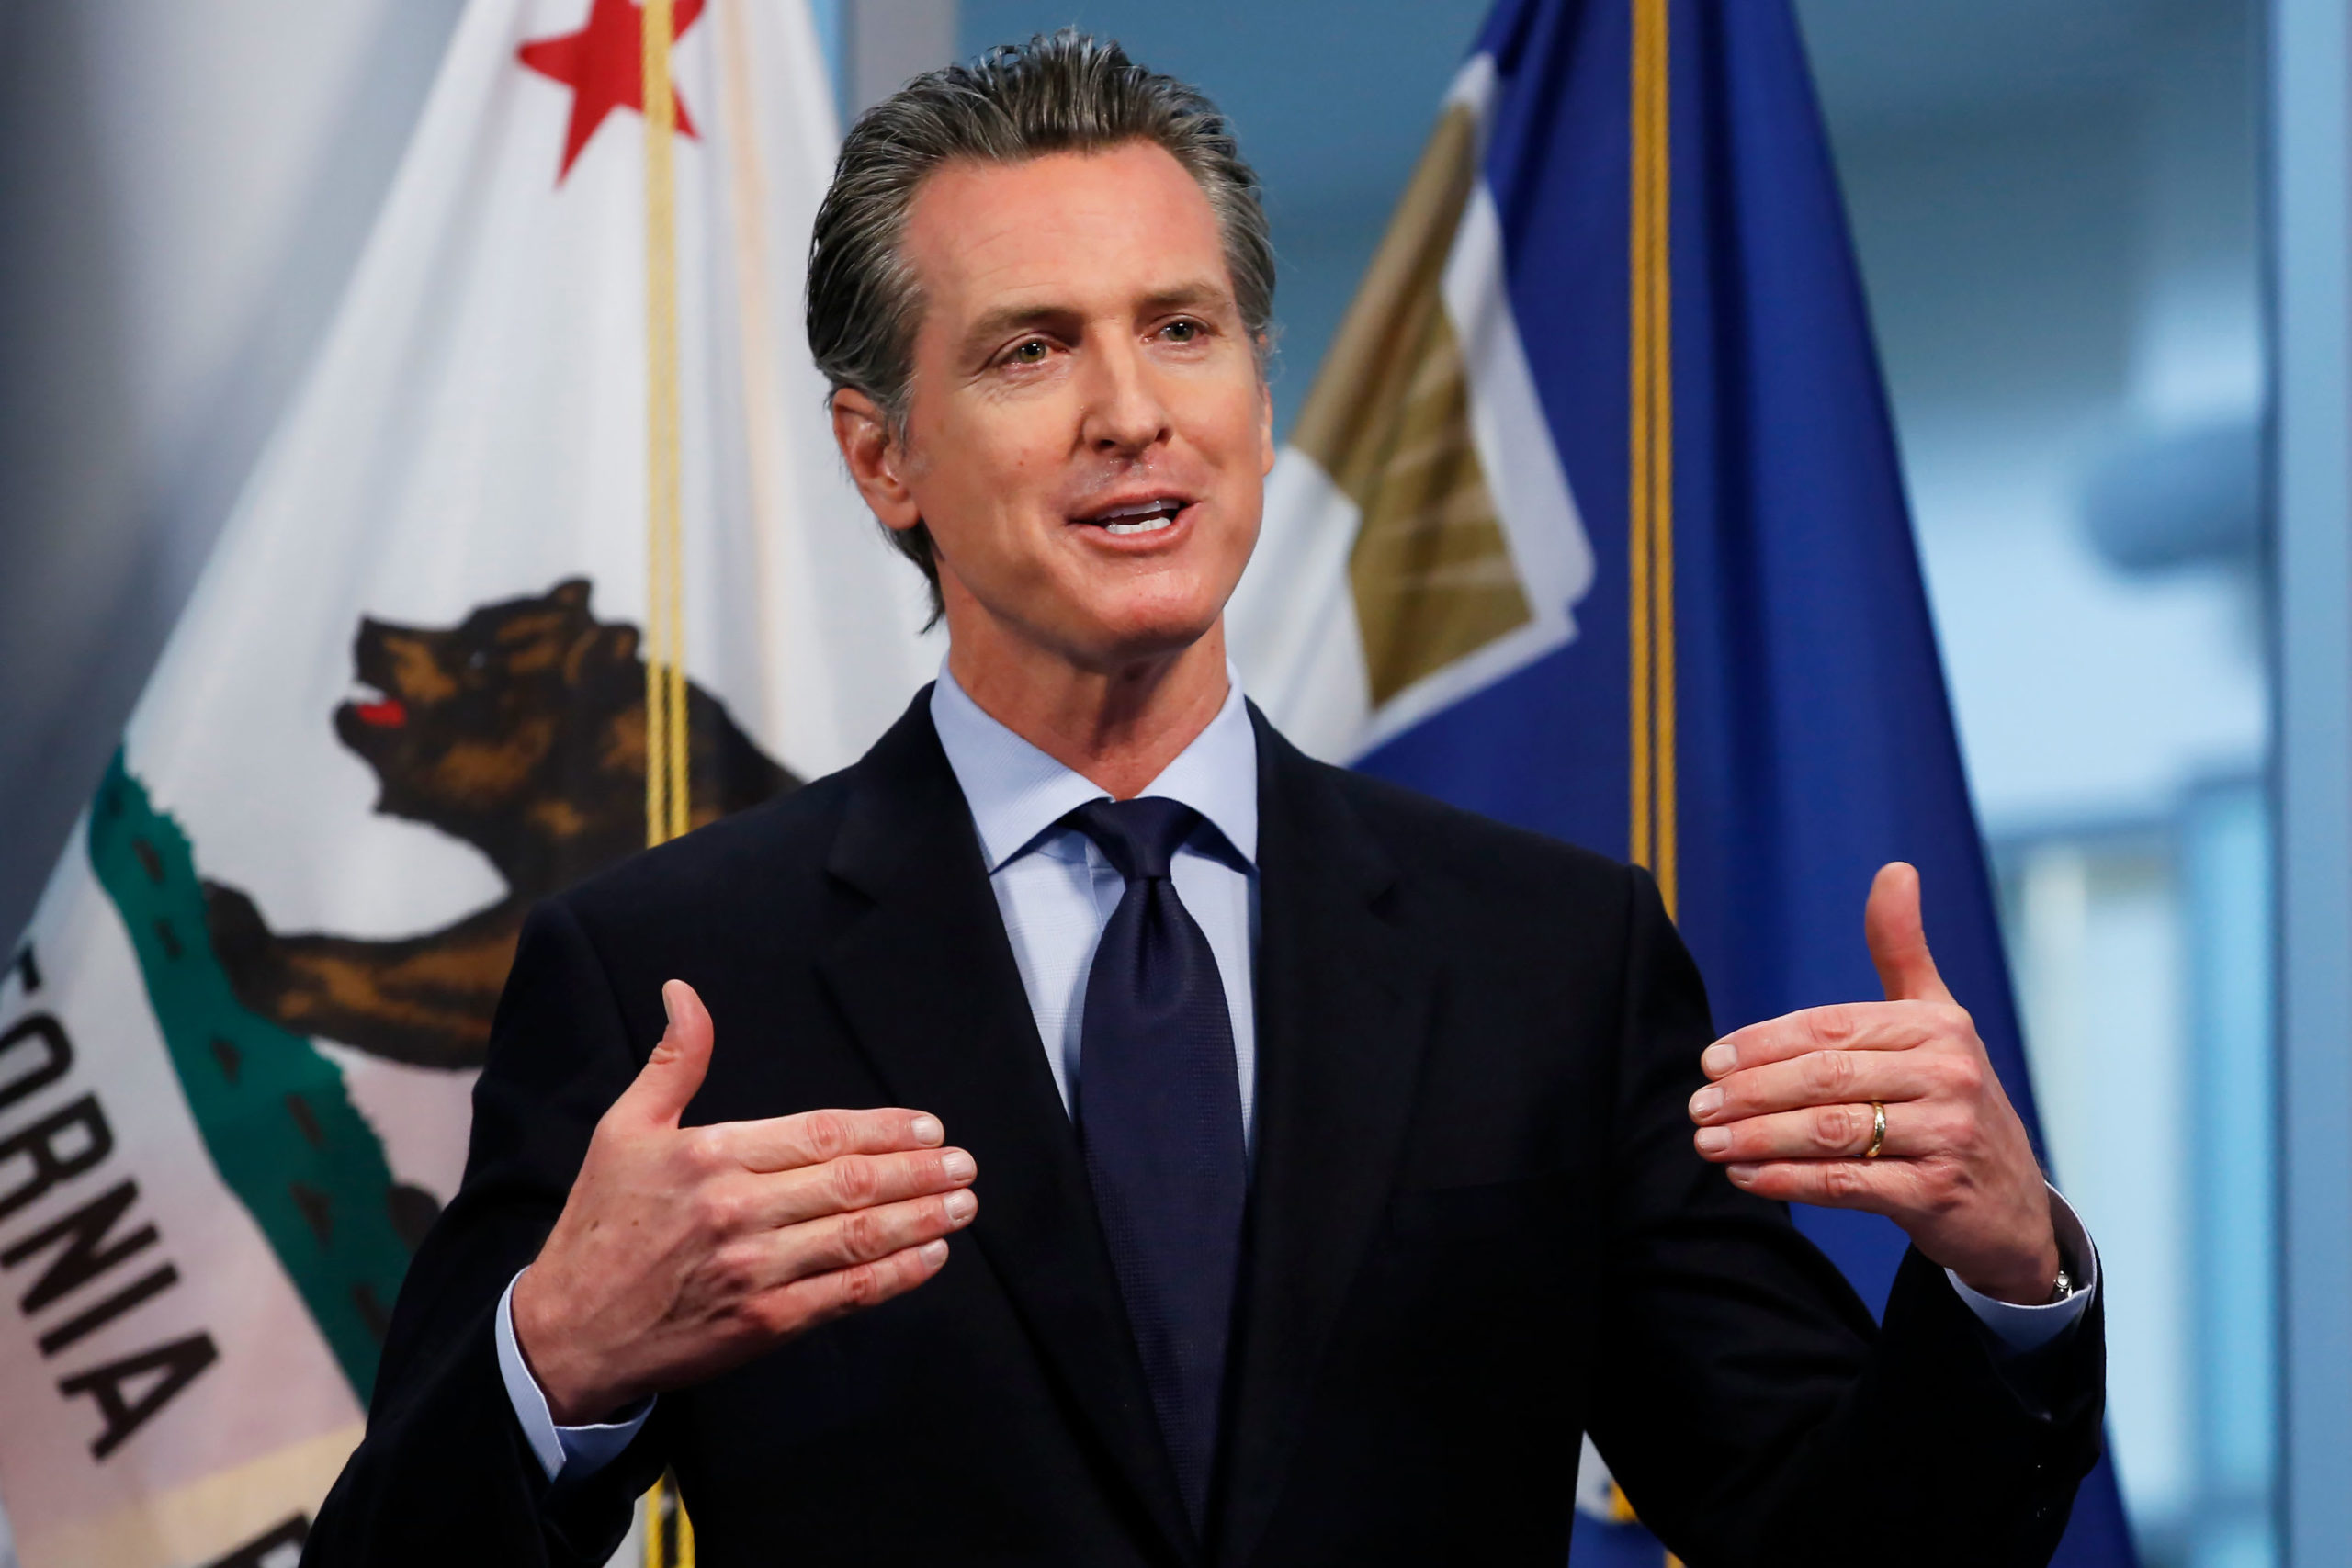 Gov. Newsom Announces Rules To Reopen Malls And Restaurants Of California